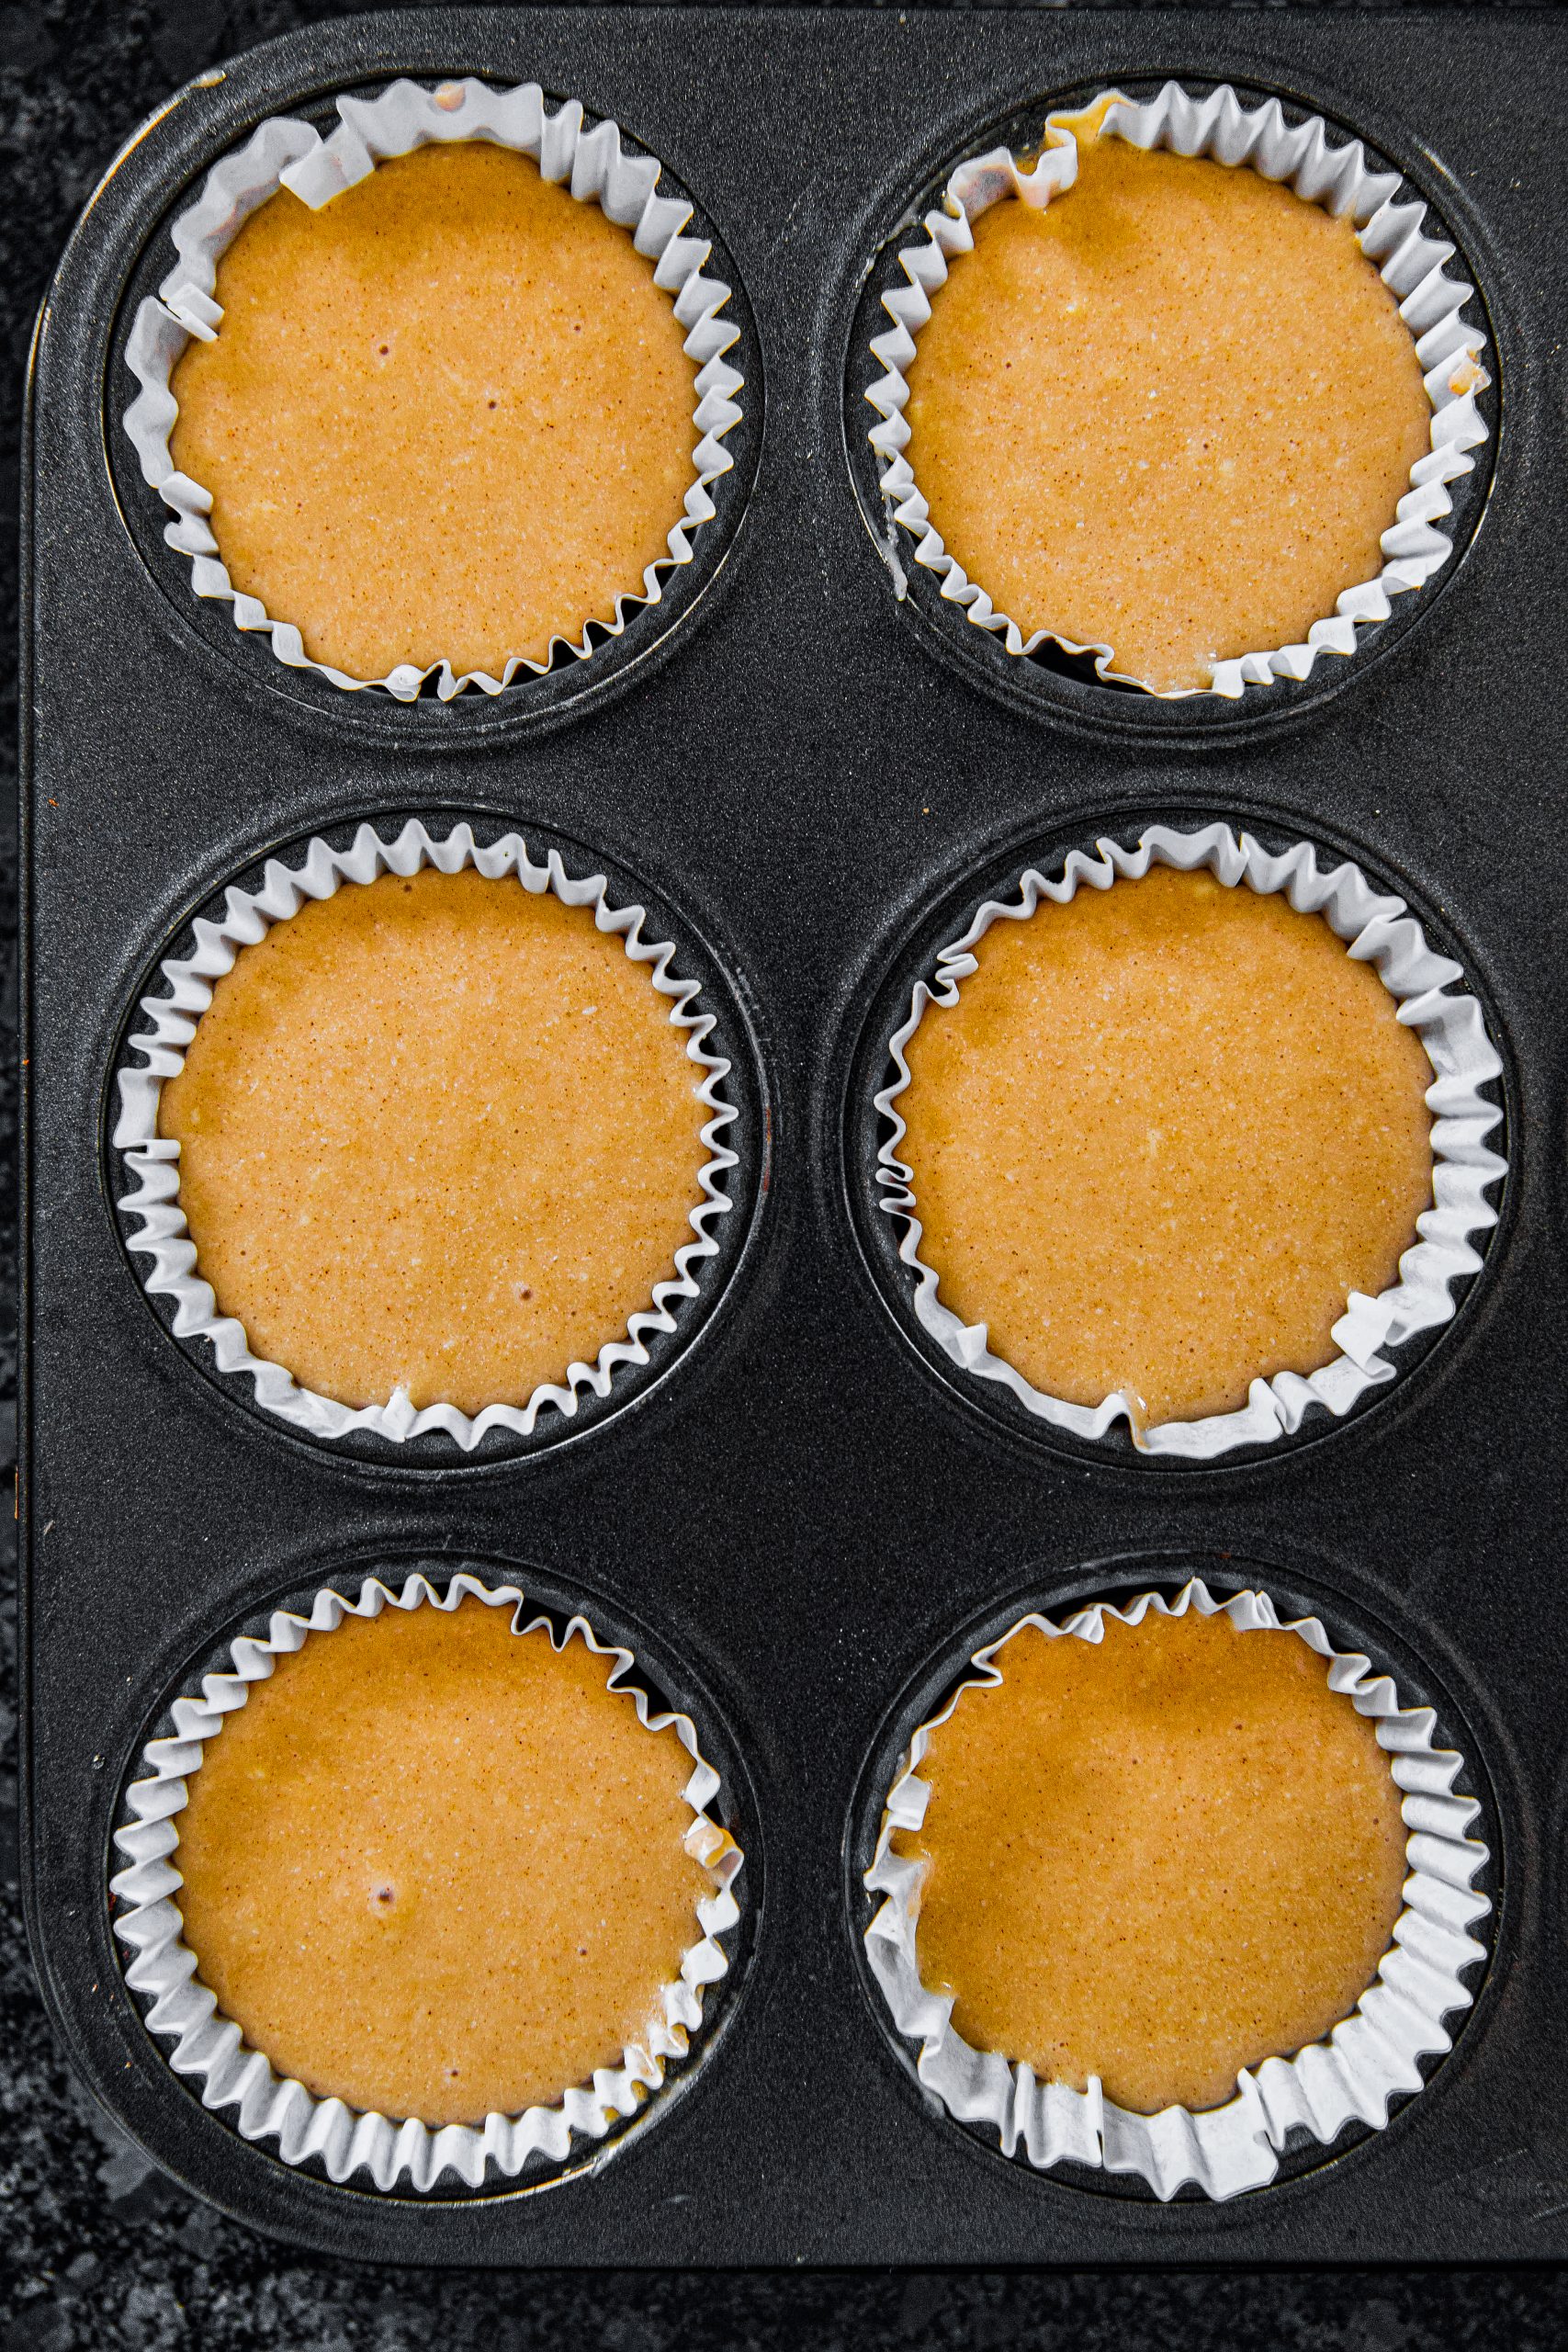 Fill each ¾ full of batter and place in preheated oven for 19 minutes or until toothpick comes out clean.